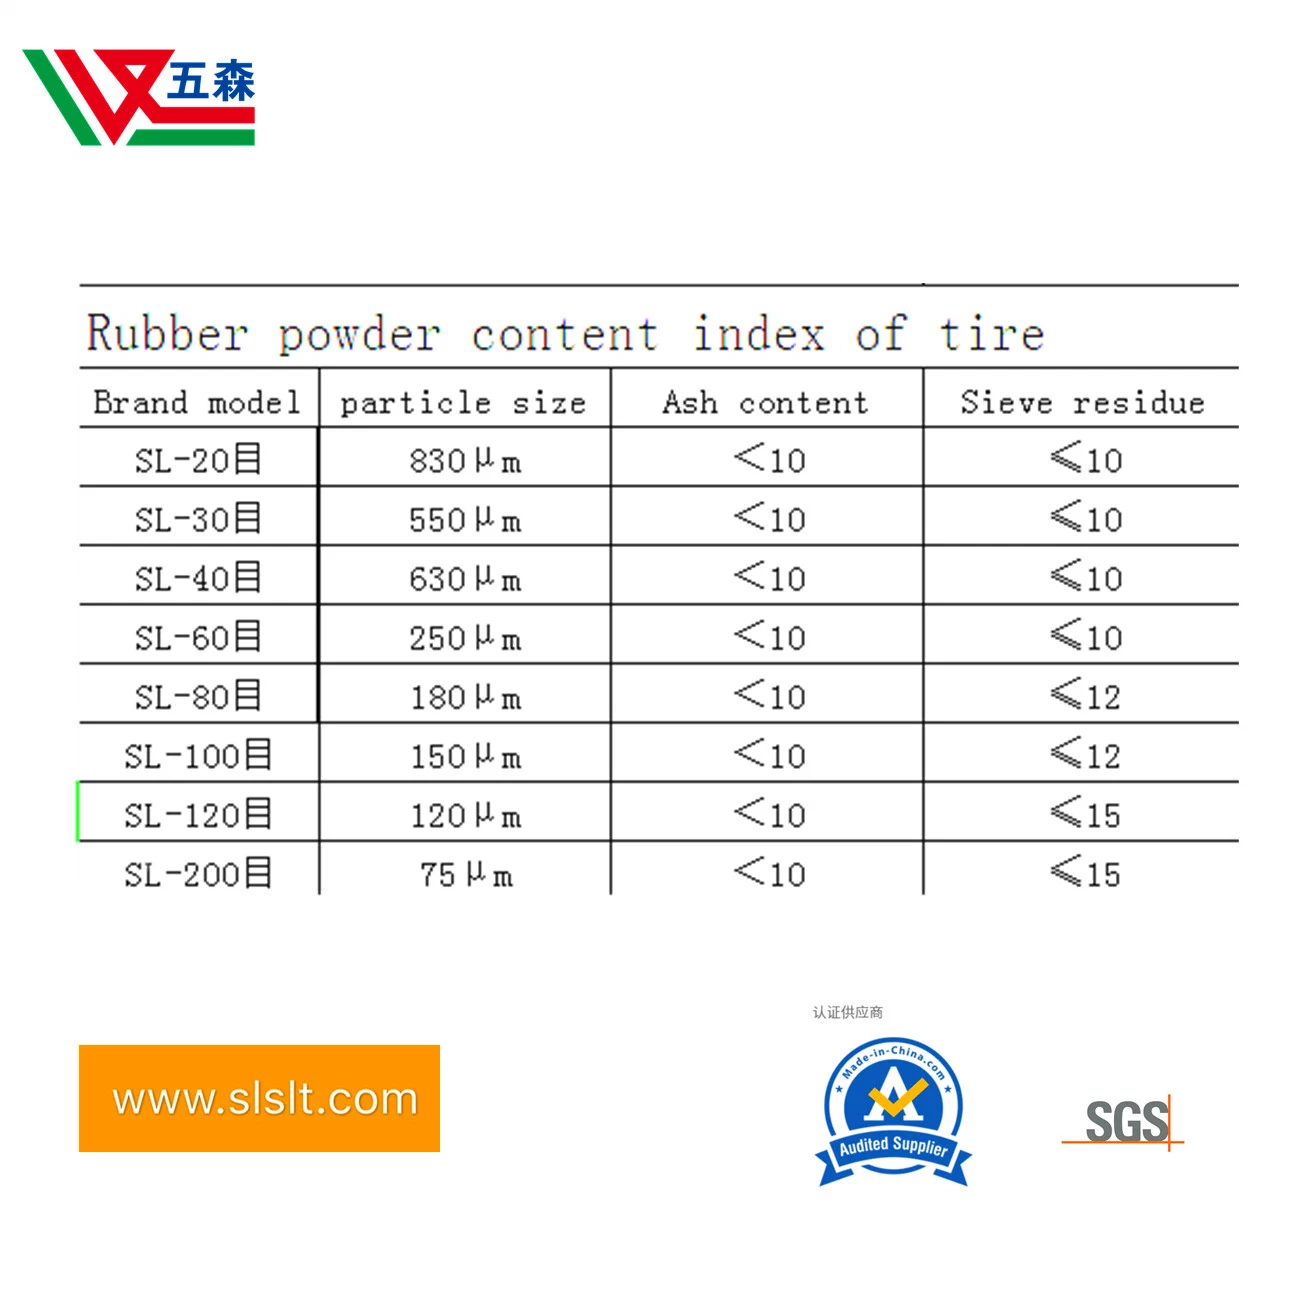 120m Tire Rubber Powder From Chinese Rubber Manufacturers, Special Tire Rubber Powder for Rubber Track, Antiskid and Wear-Resistant Tire Rubber Powder, Tire Rub